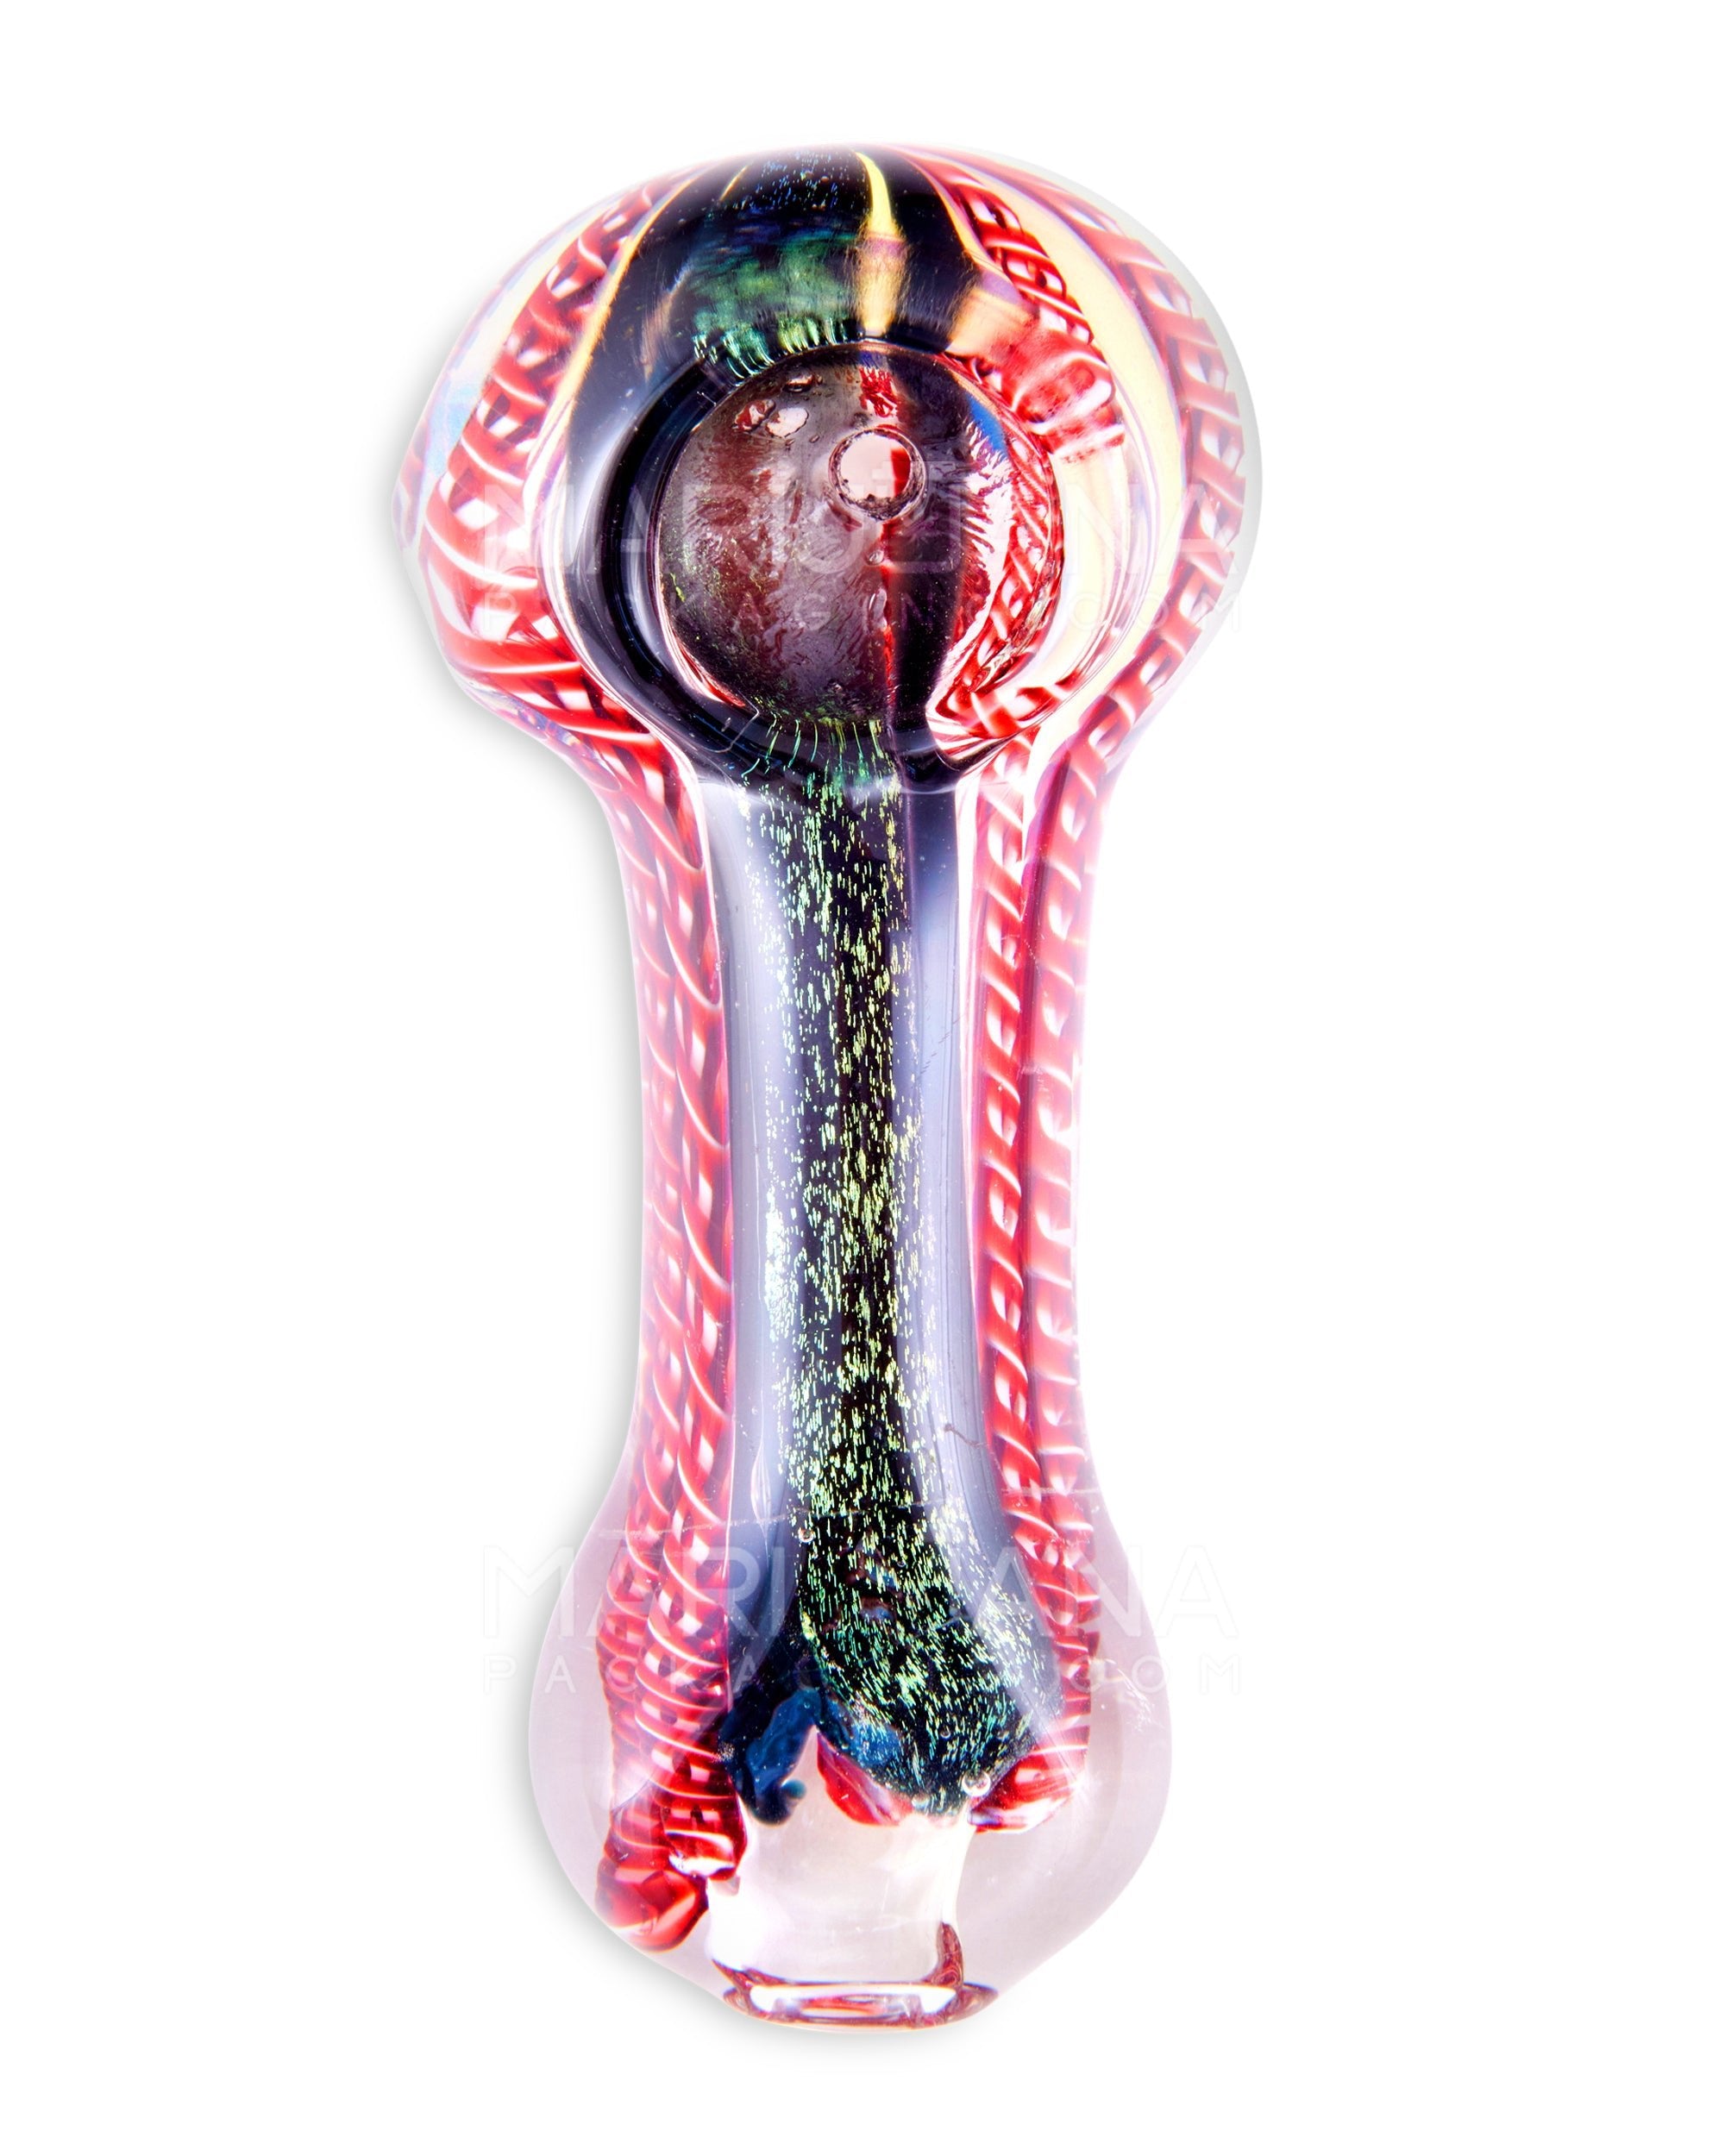 Dichro & Swirl Spoon Hand Pipe w/ Ribboning | 3.5in Long - Glass - Assorted - 2